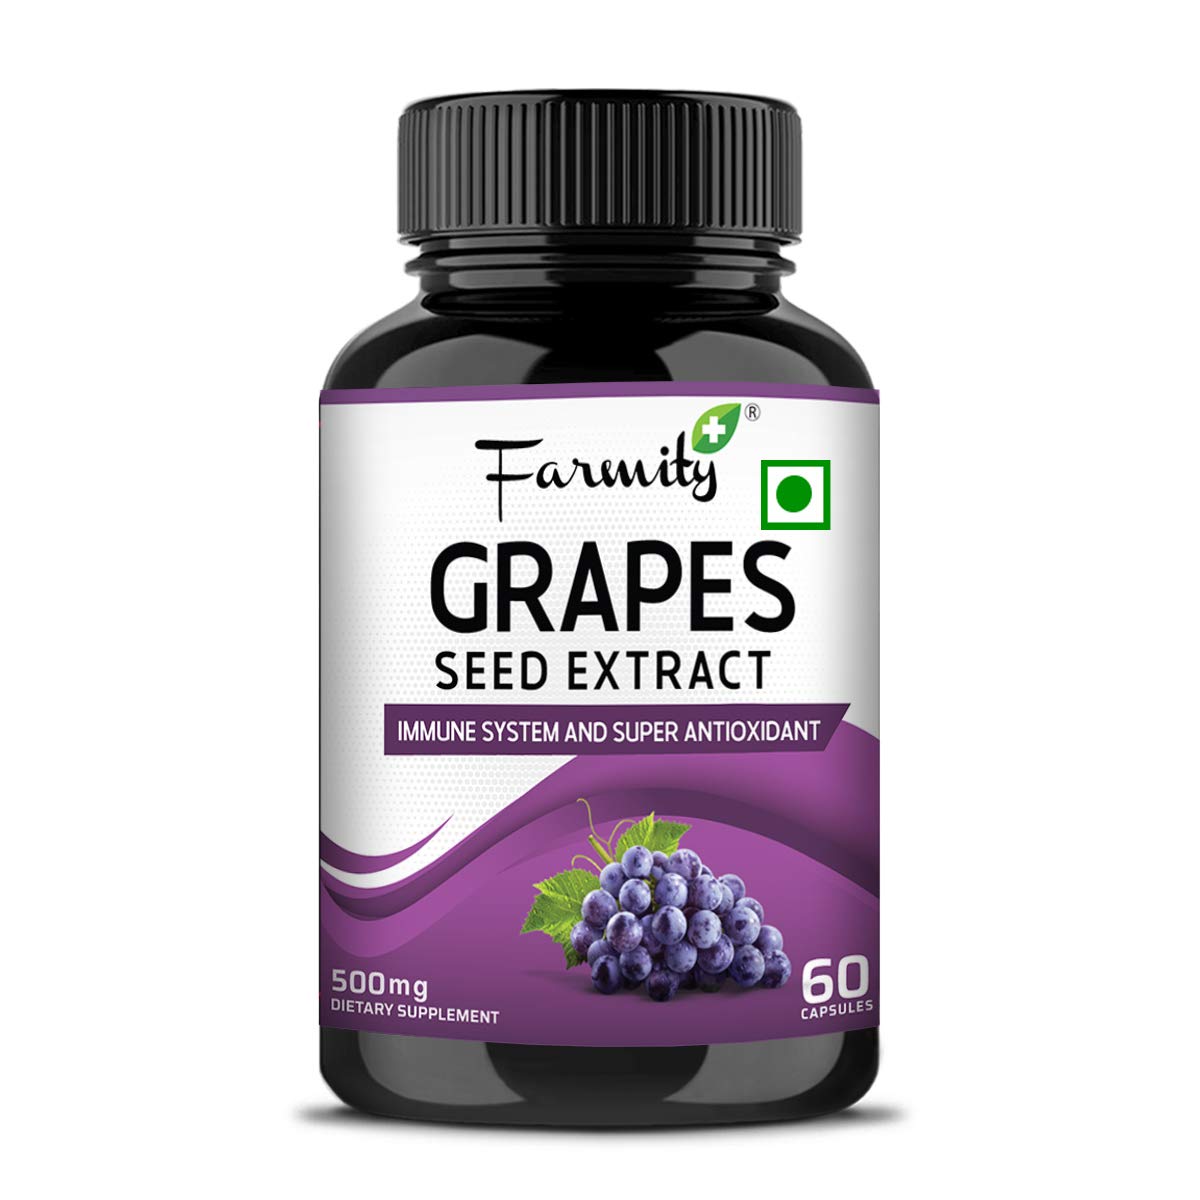 benefit of grape seed extract